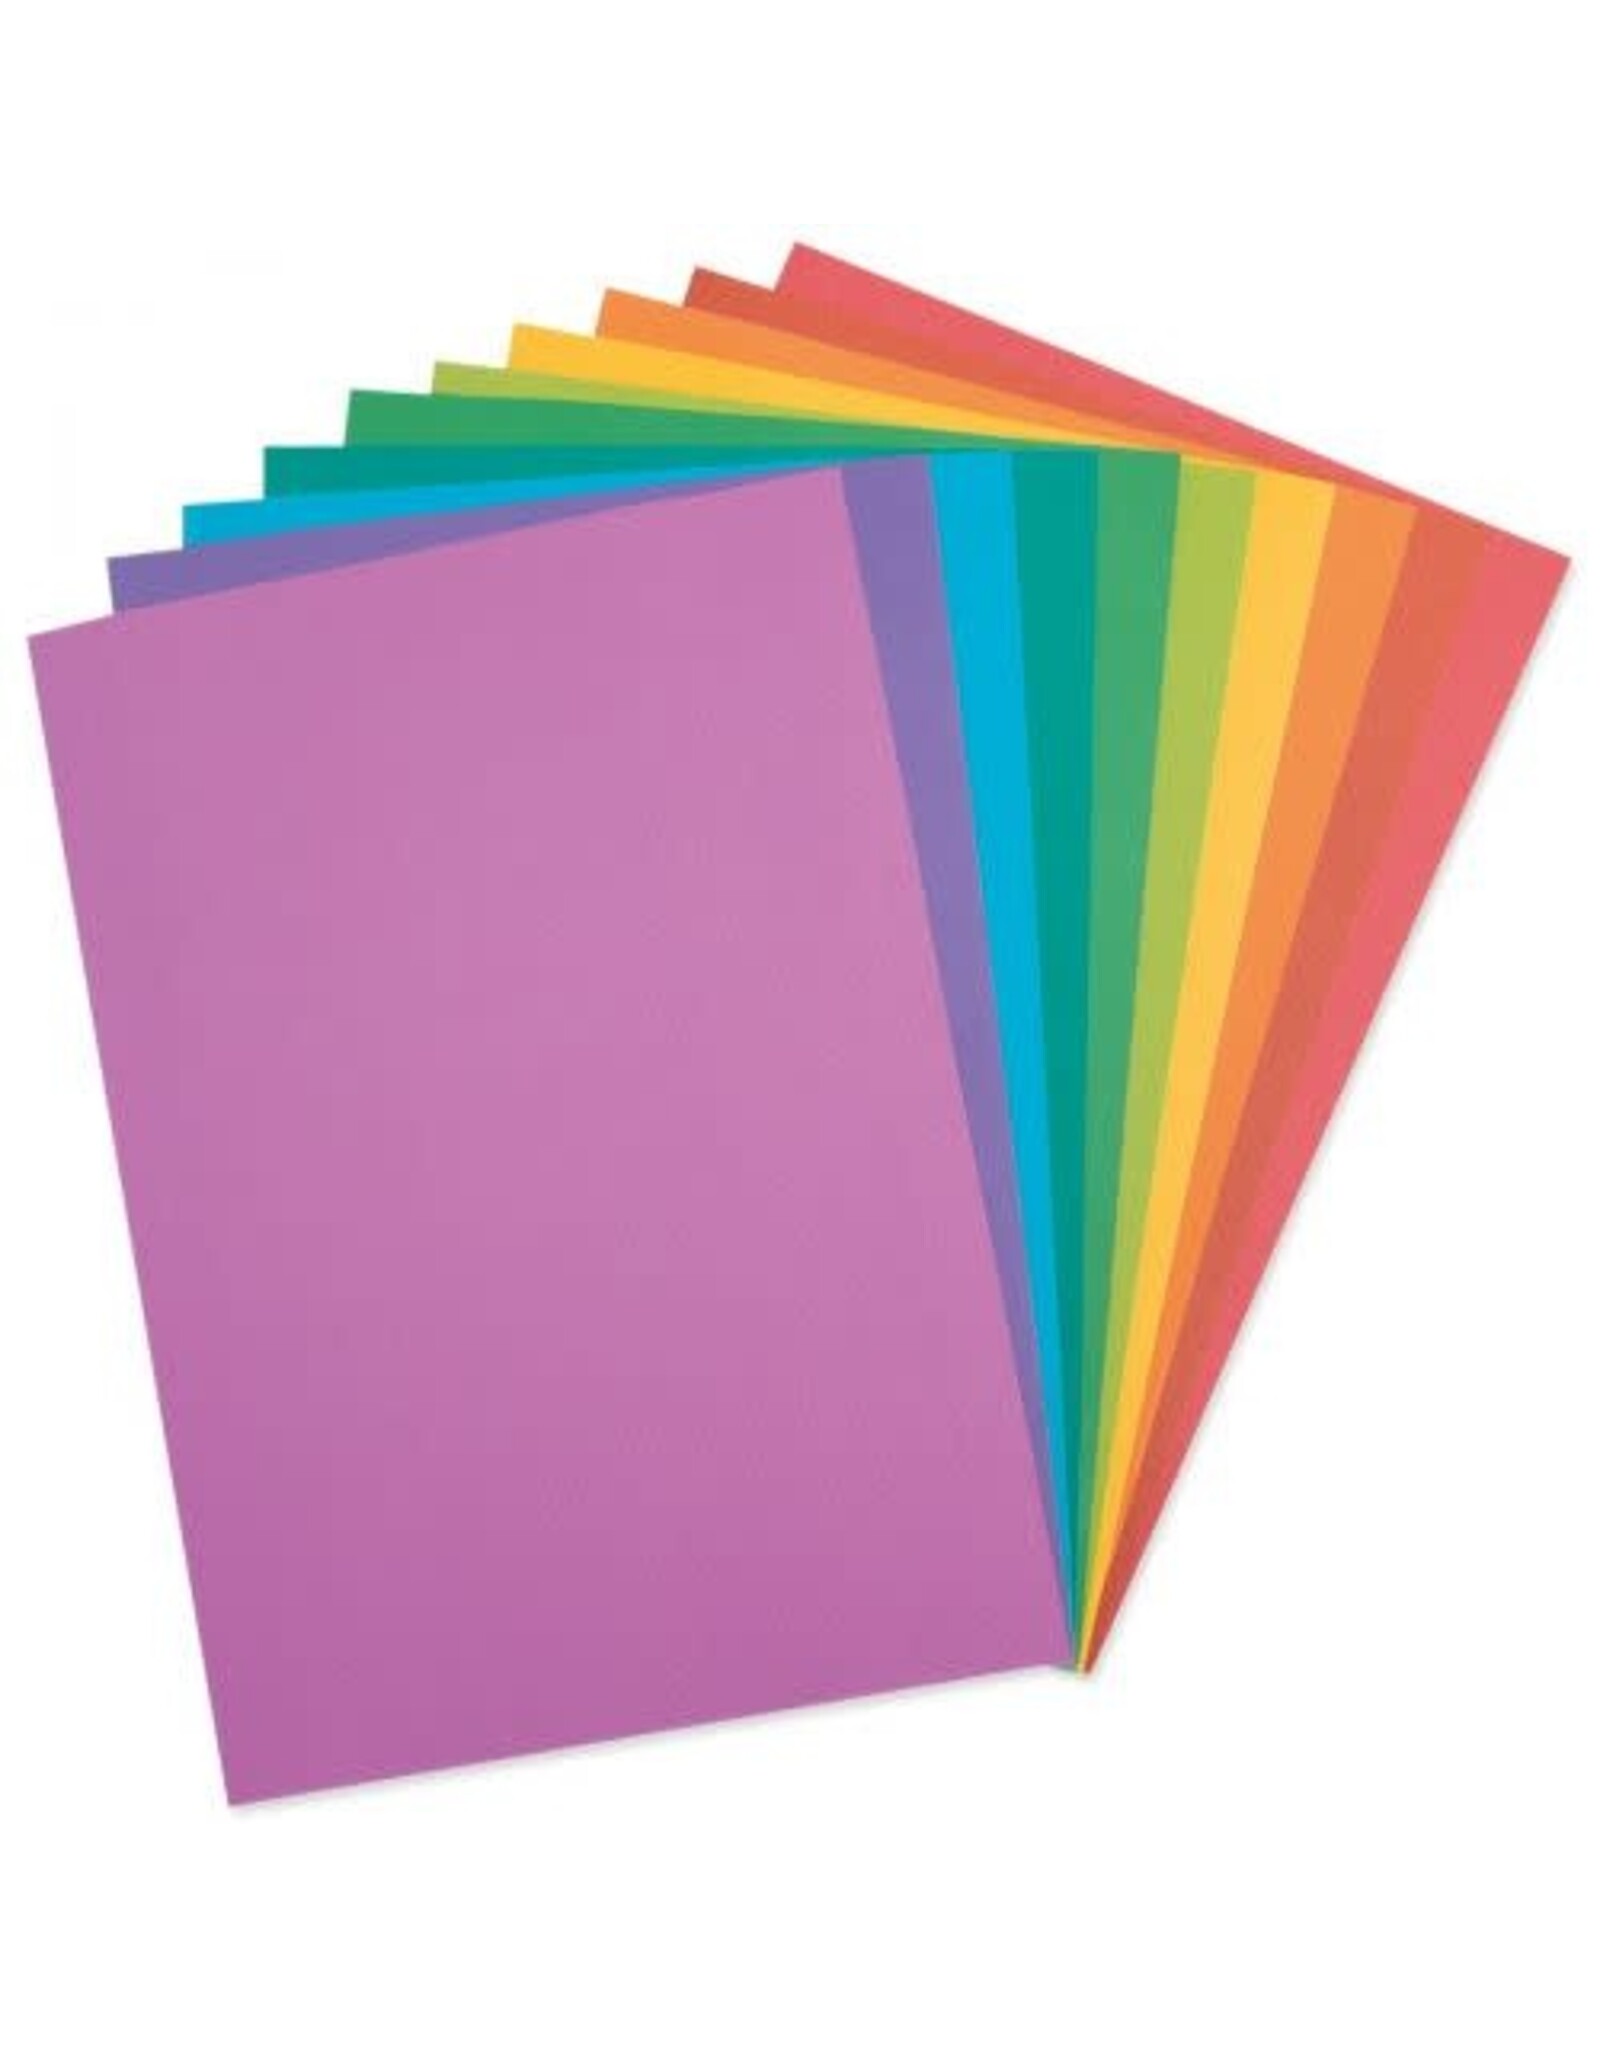 SIZZIX SIZZIX SURFACEZ ASSORTED COLORS JEWEL COLLECTION REVEALZ SANDABLE A4 CARDSTOCK 40 SHEETS